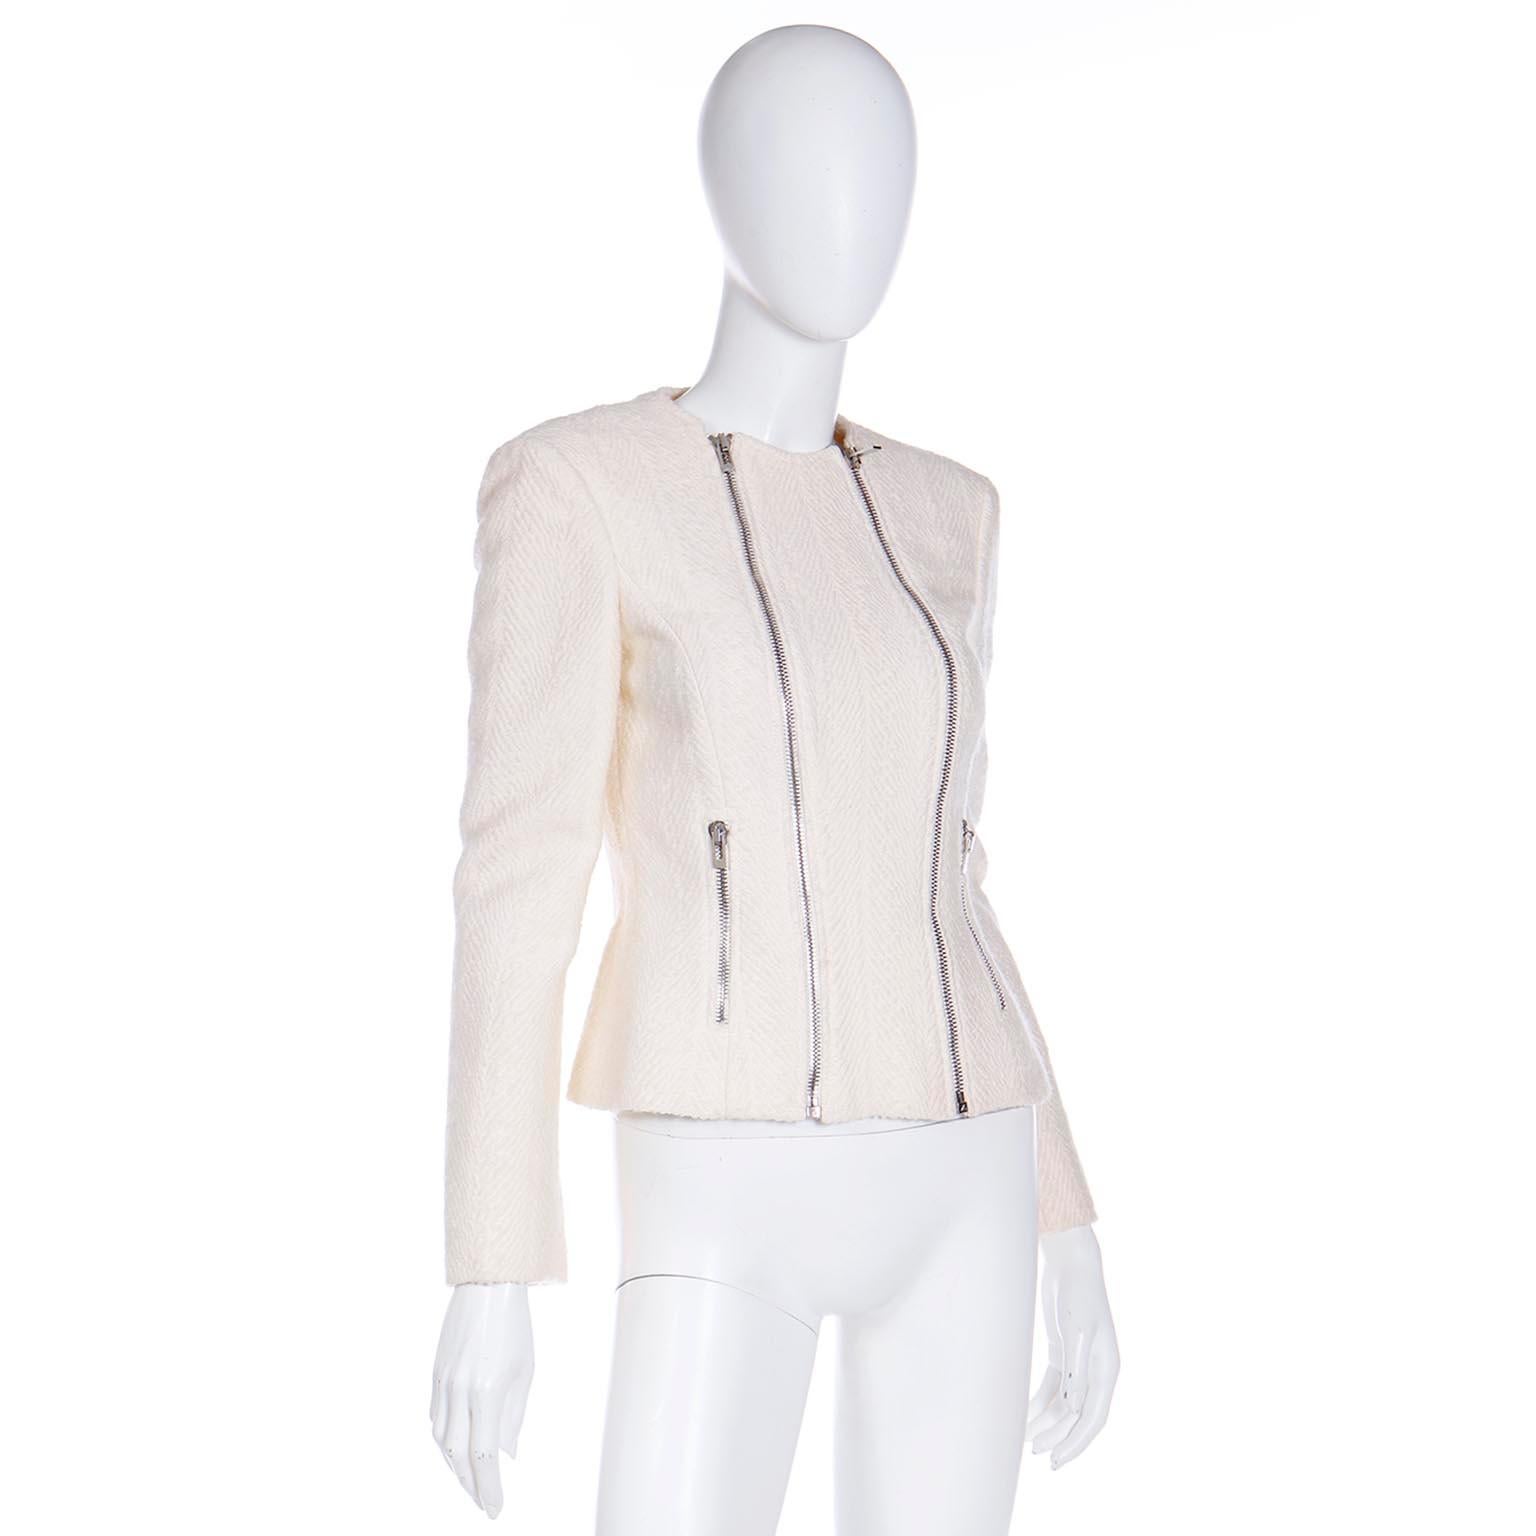 Early 2000s Gianni Versace Ivory Boucle Wool Double Zip Front Jacket In Excellent Condition For Sale In Portland, OR